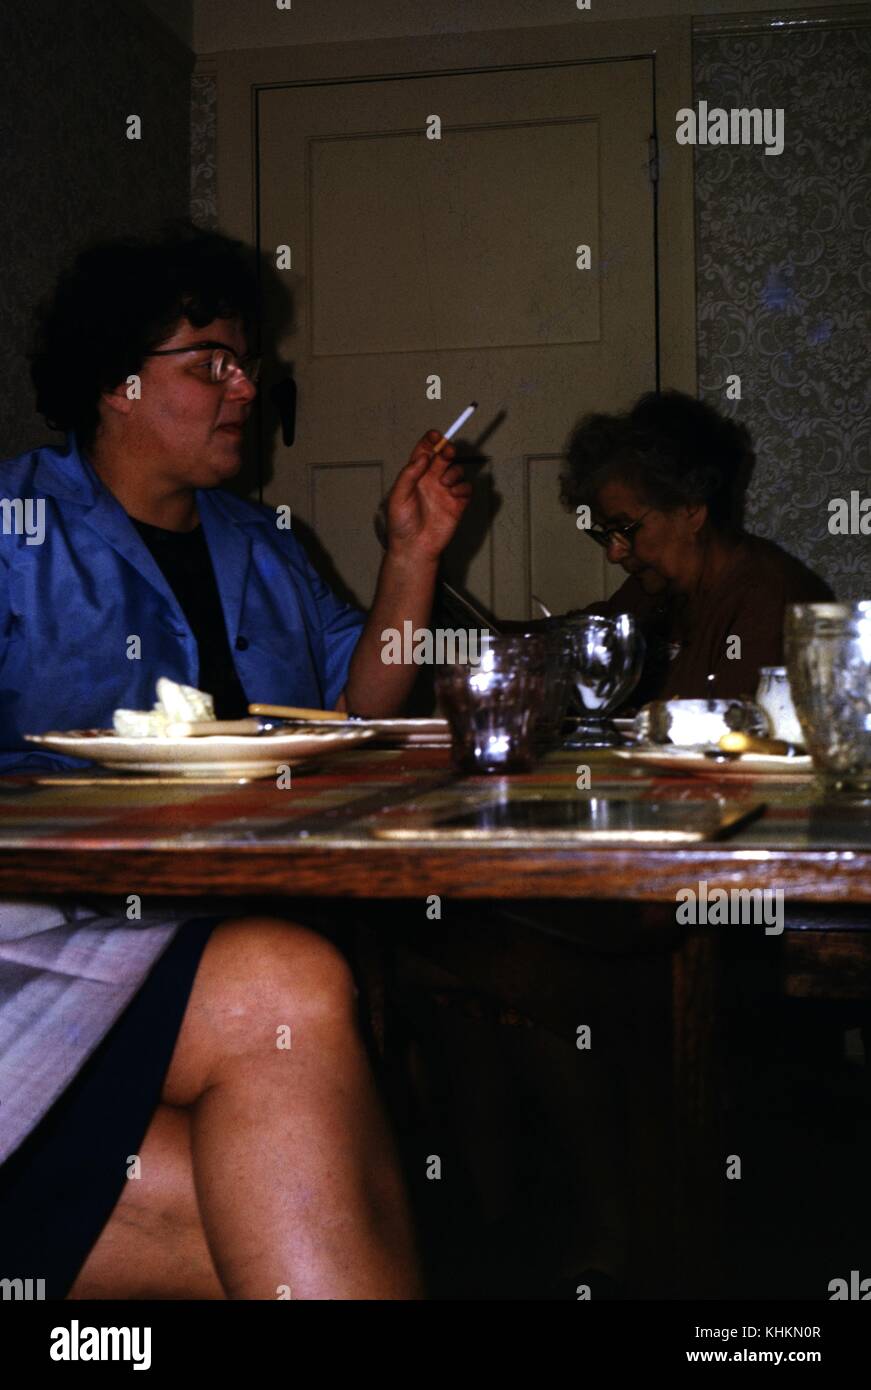 Mature women sitting around a table and smoking cigarettes after having tea, partial view of the underside of the table with a women's legs visible, 1961. Stock Photo